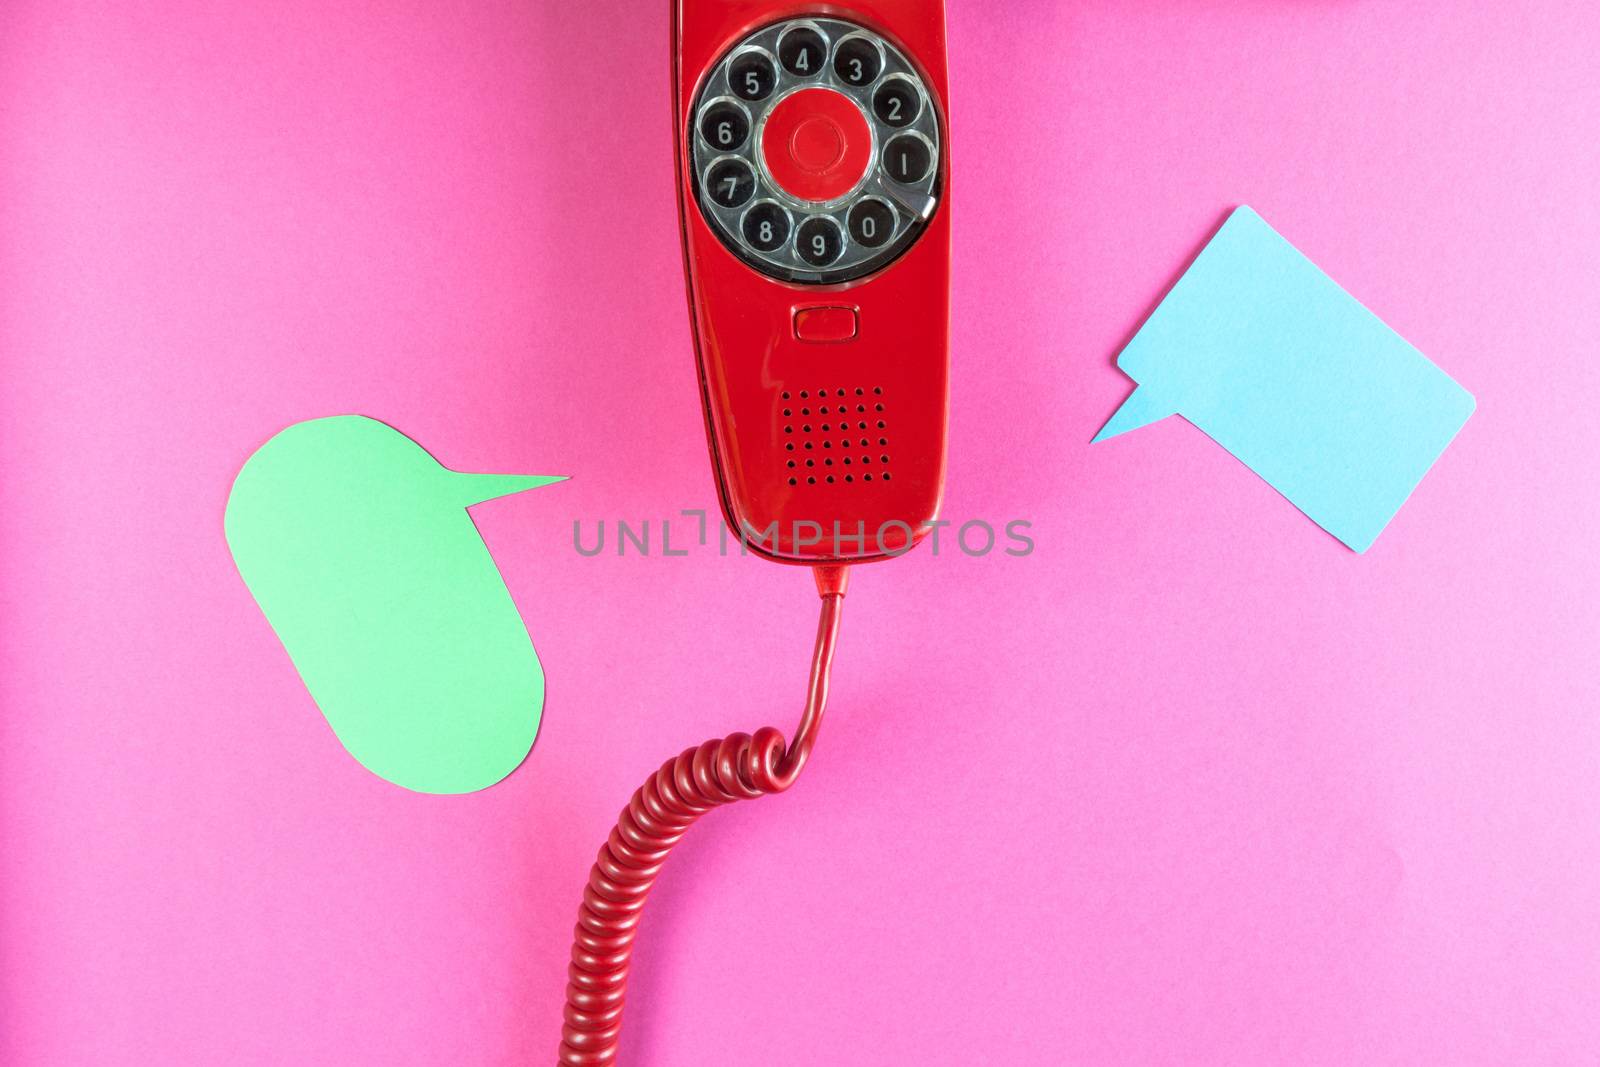 Vintage red phone and speech ballons by andongob